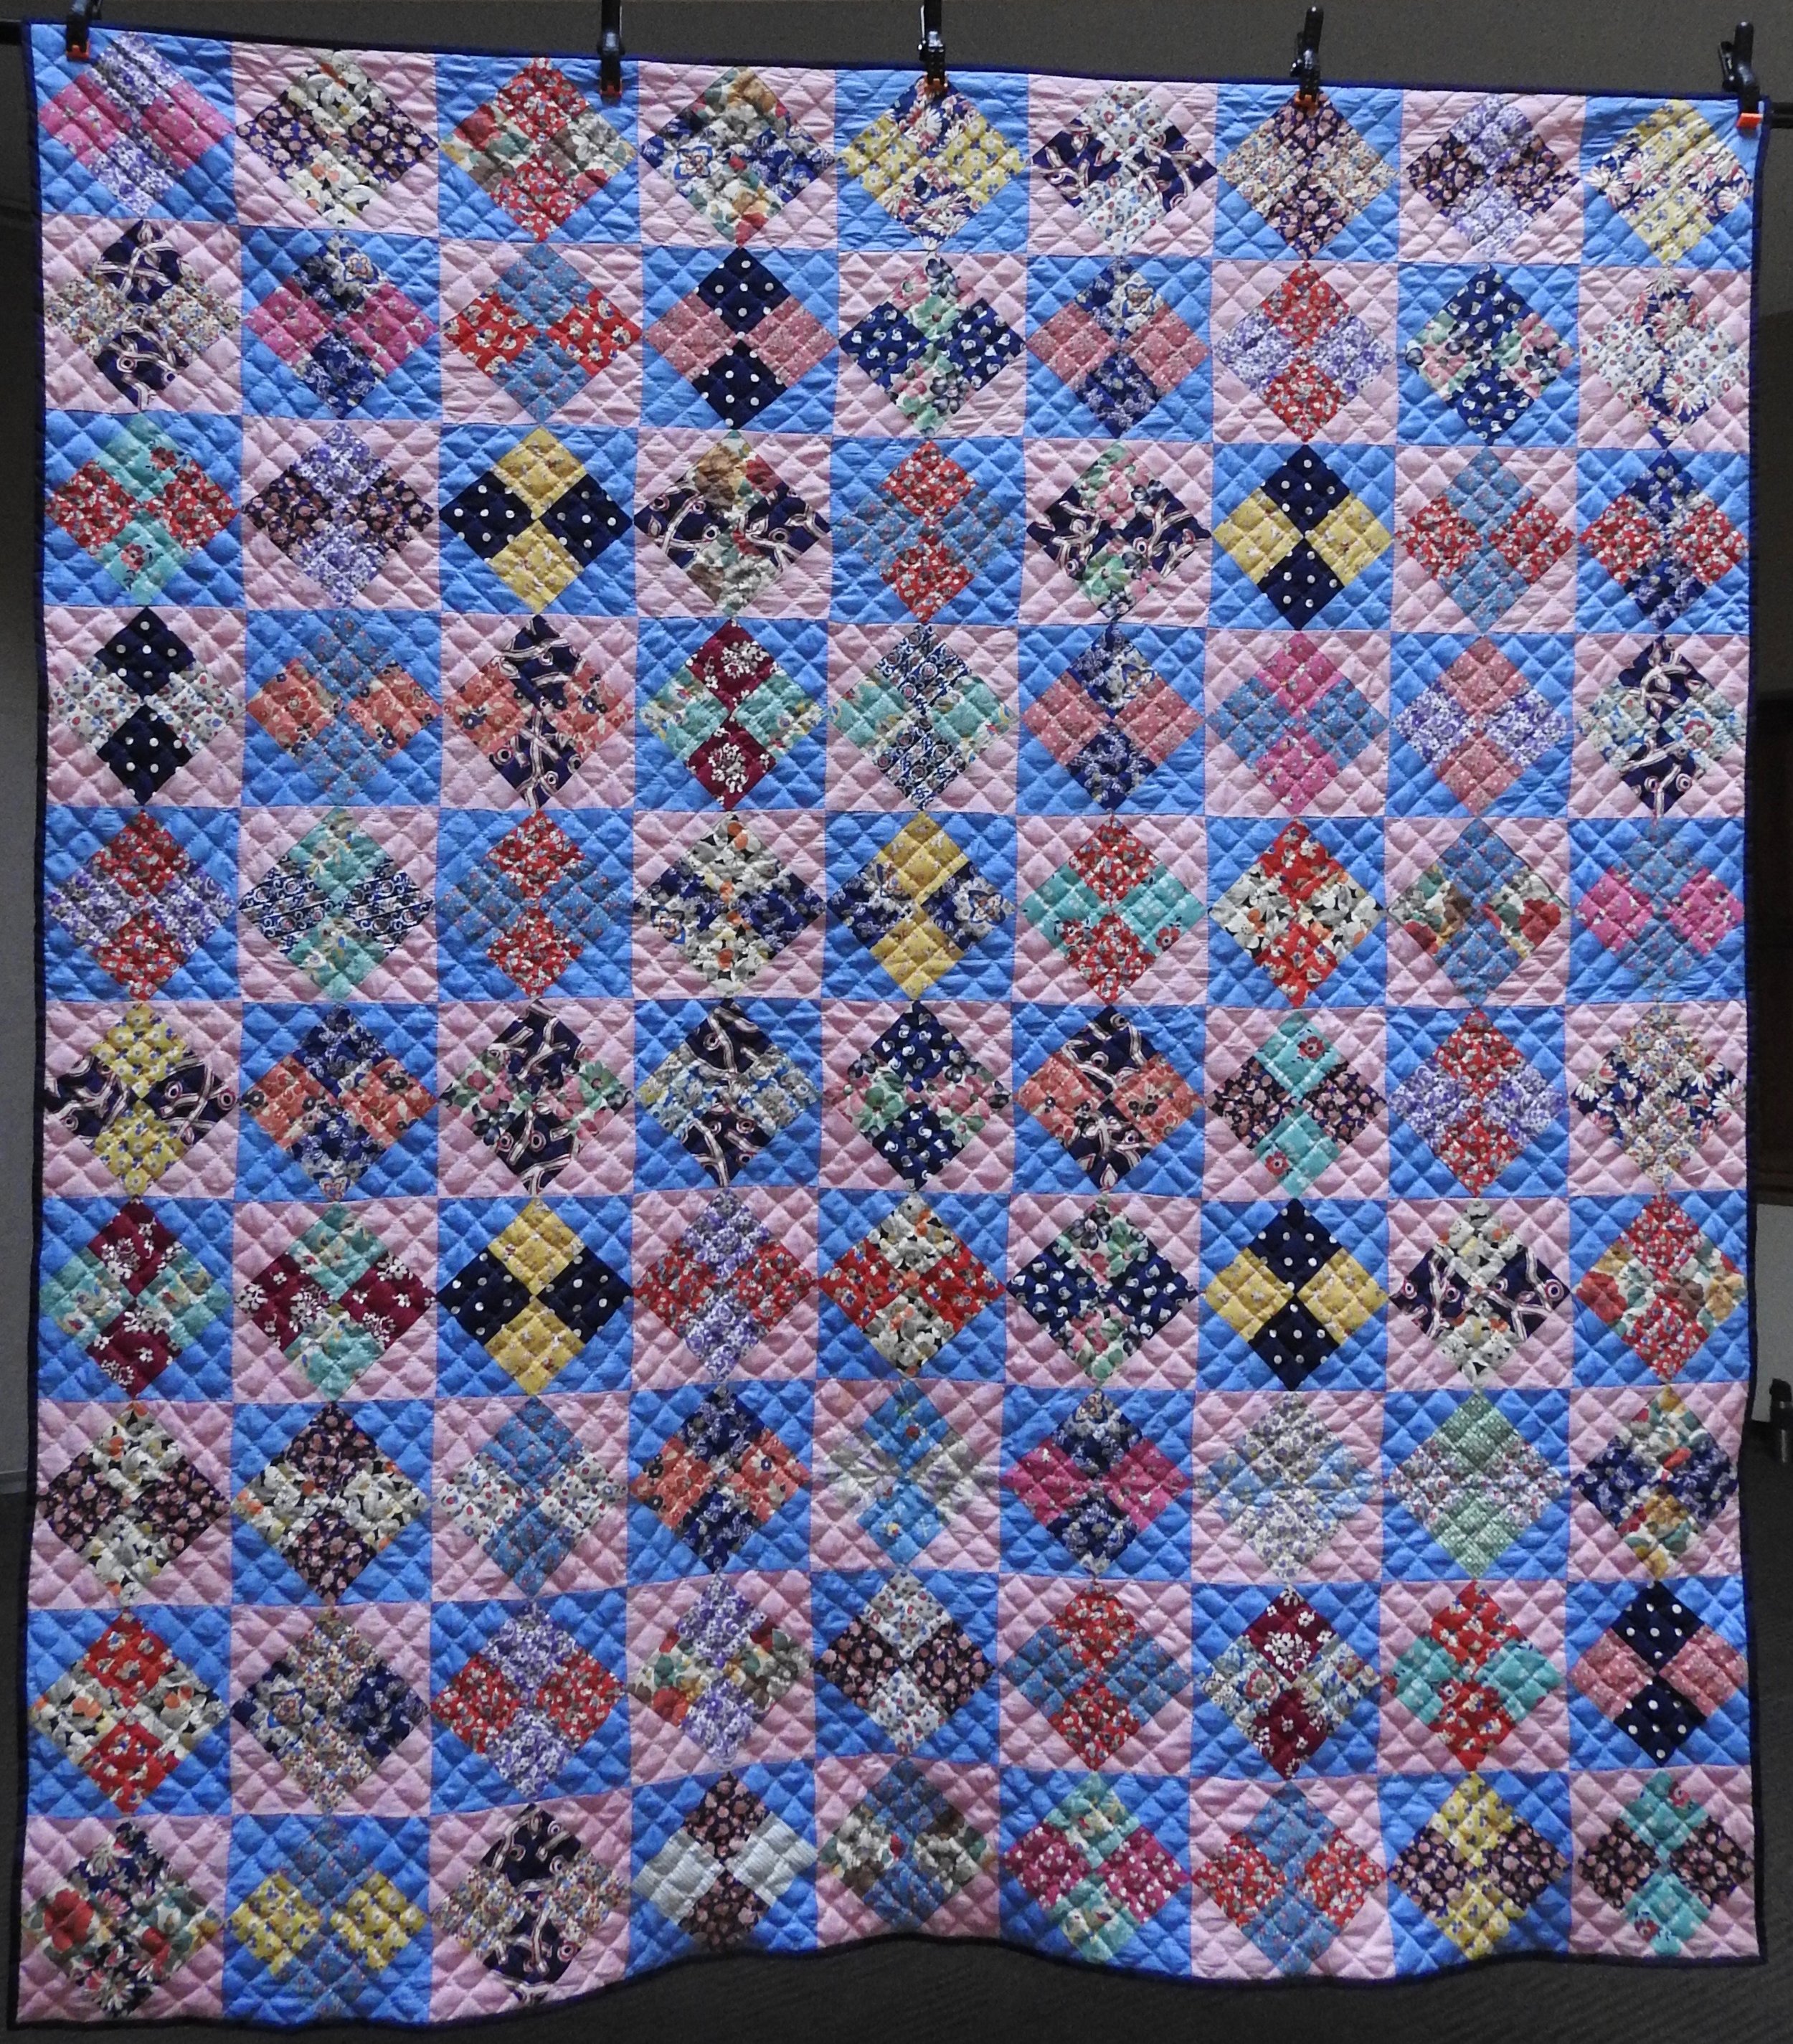 Vintage Four Patch on Point, Pieced of Vintage Fabrics, Hand Quilted by Evergreen Place Quilters, donated Anonymously, 68 x 88”